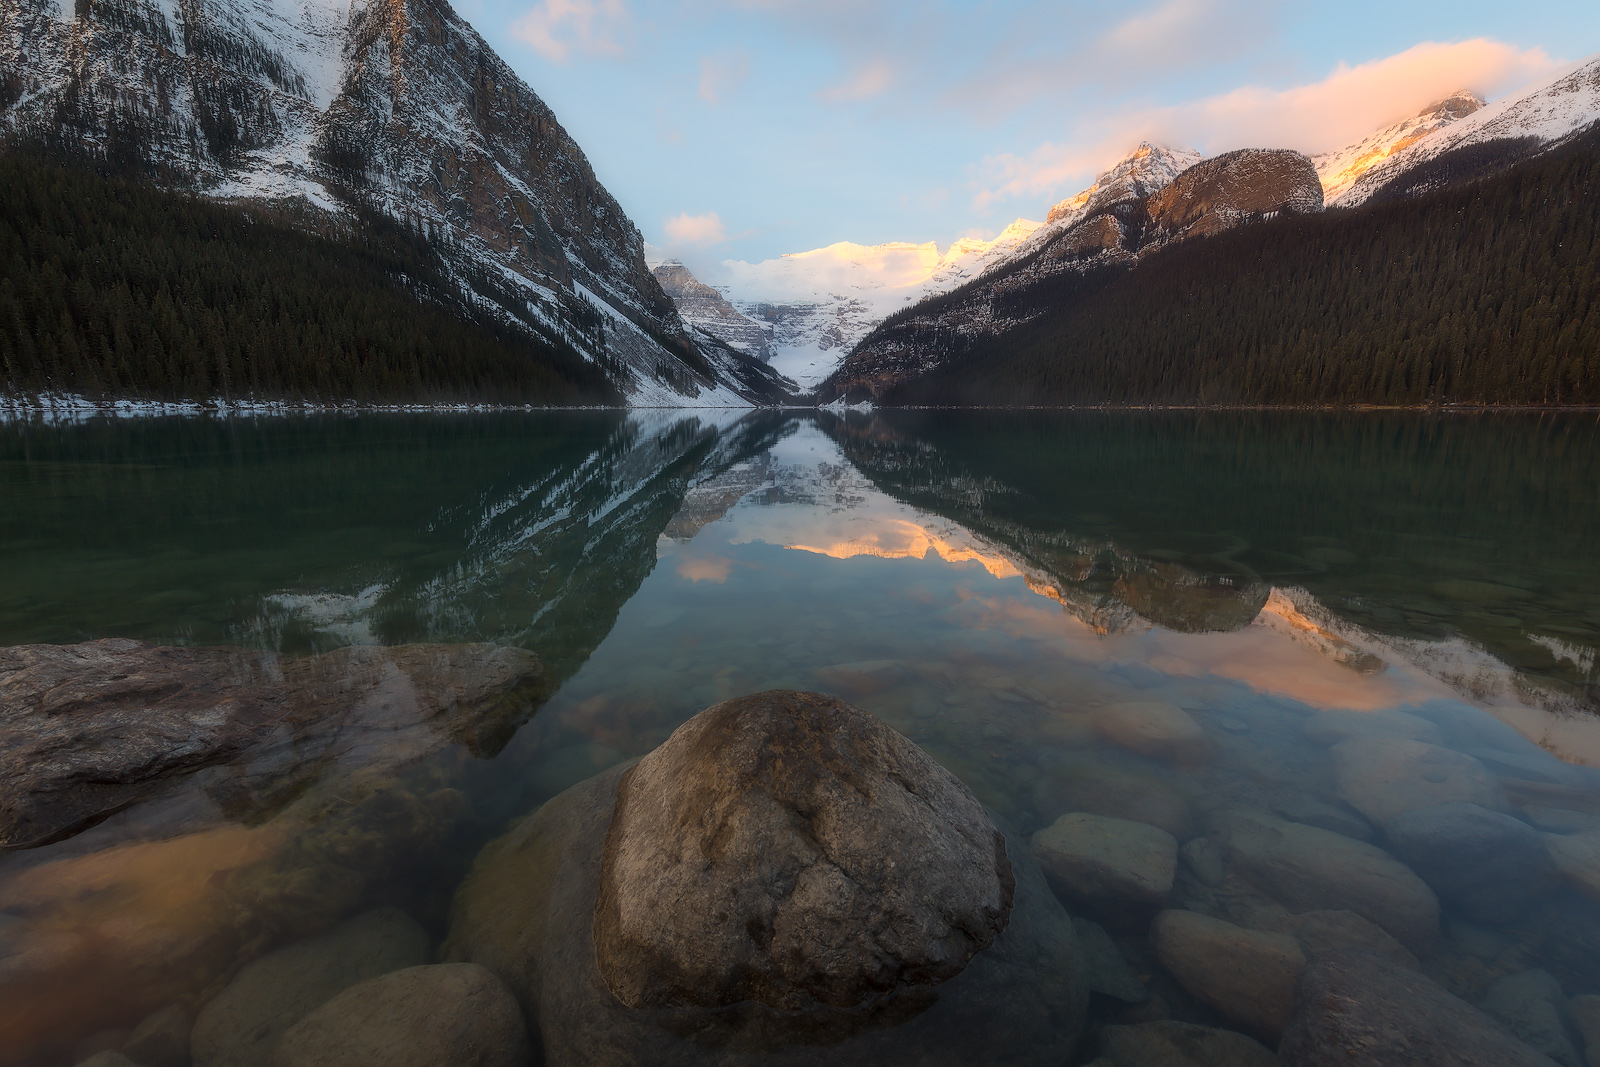 The morning sun peeks over the mountains to light up peaks and clouds over Alberta's Lake Louise.